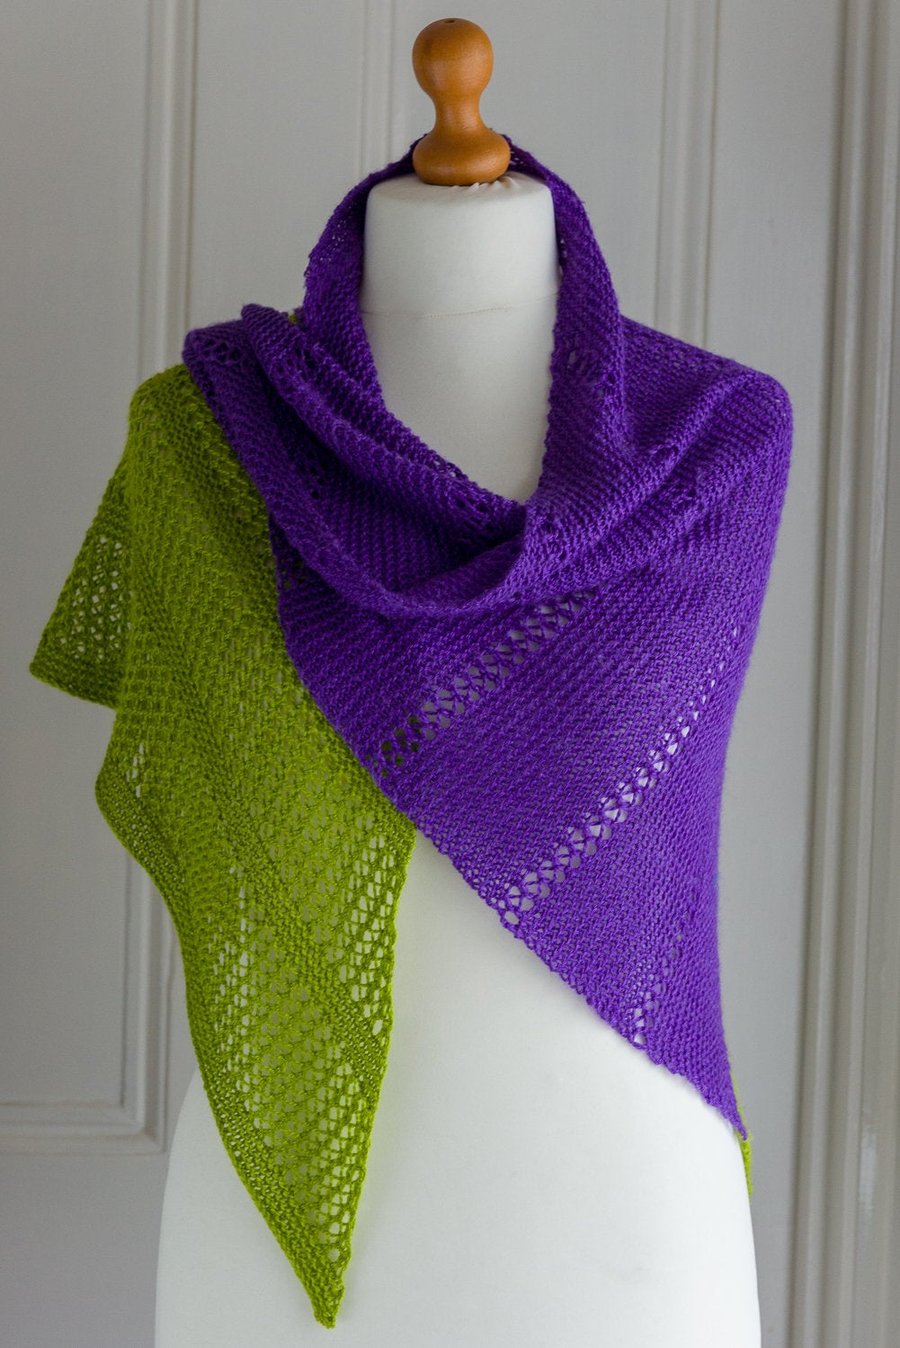 Lace shawl hand knit in a merino wool and silk yarn in amethyst purple and green